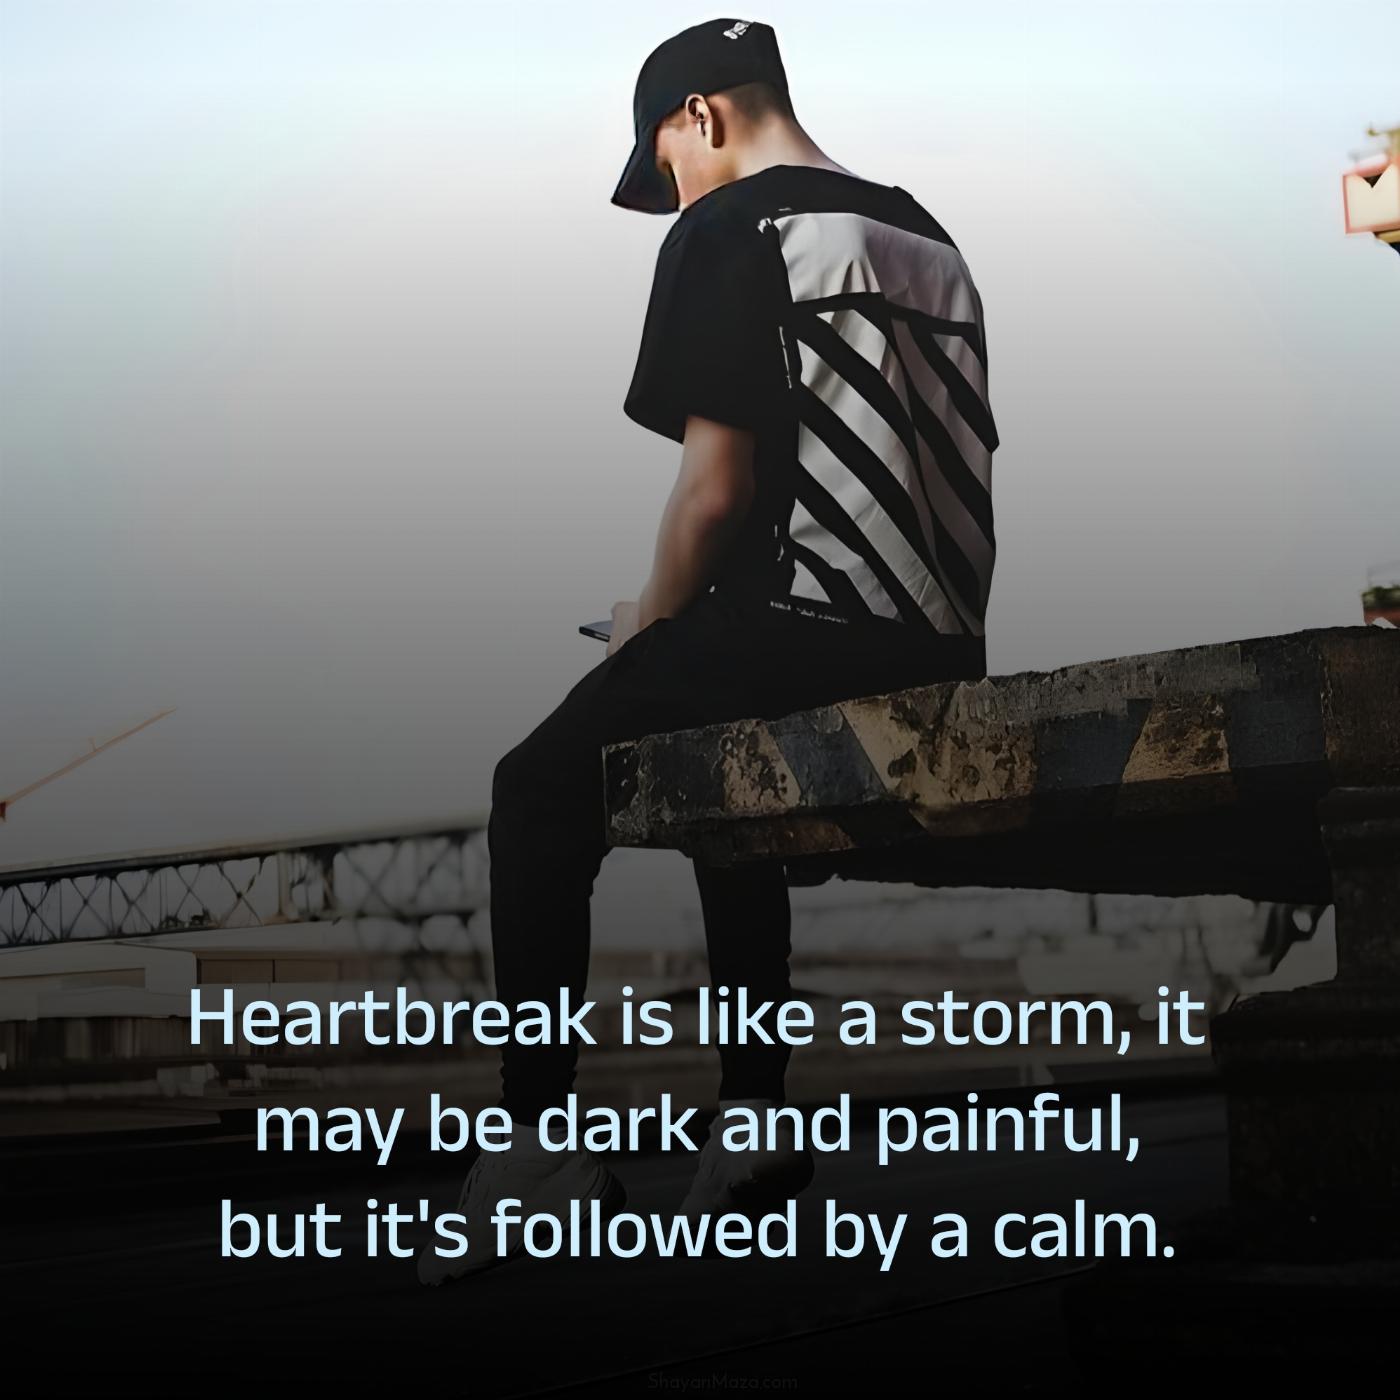 Heartbreak is like a storm it may be dark and painful